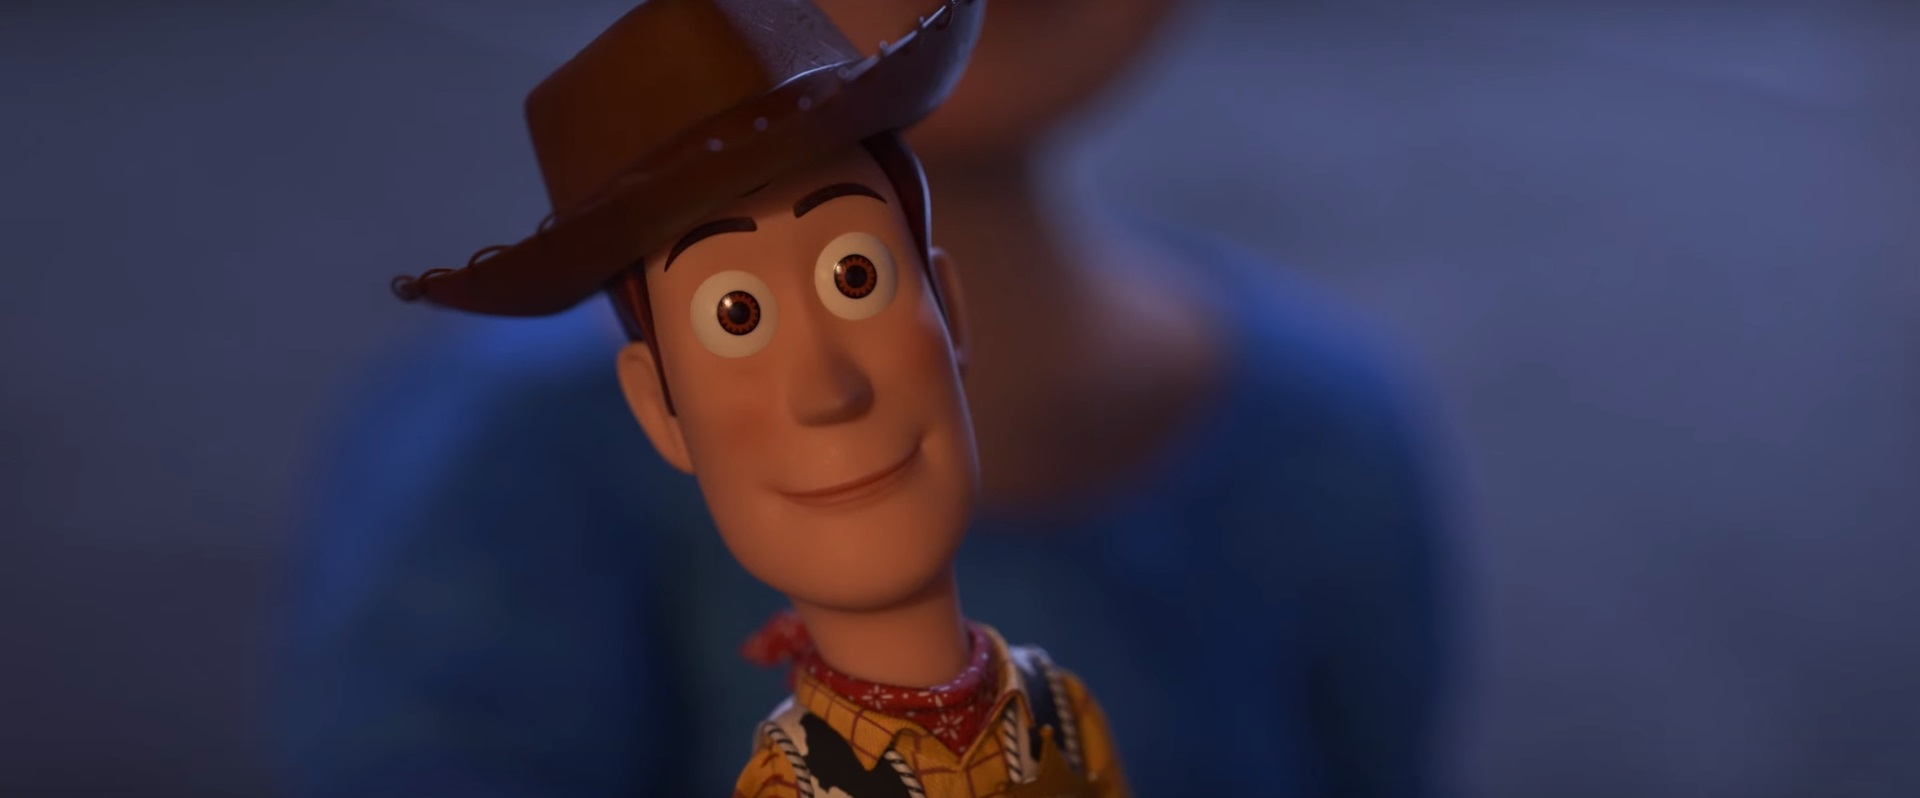 download new toy story movie